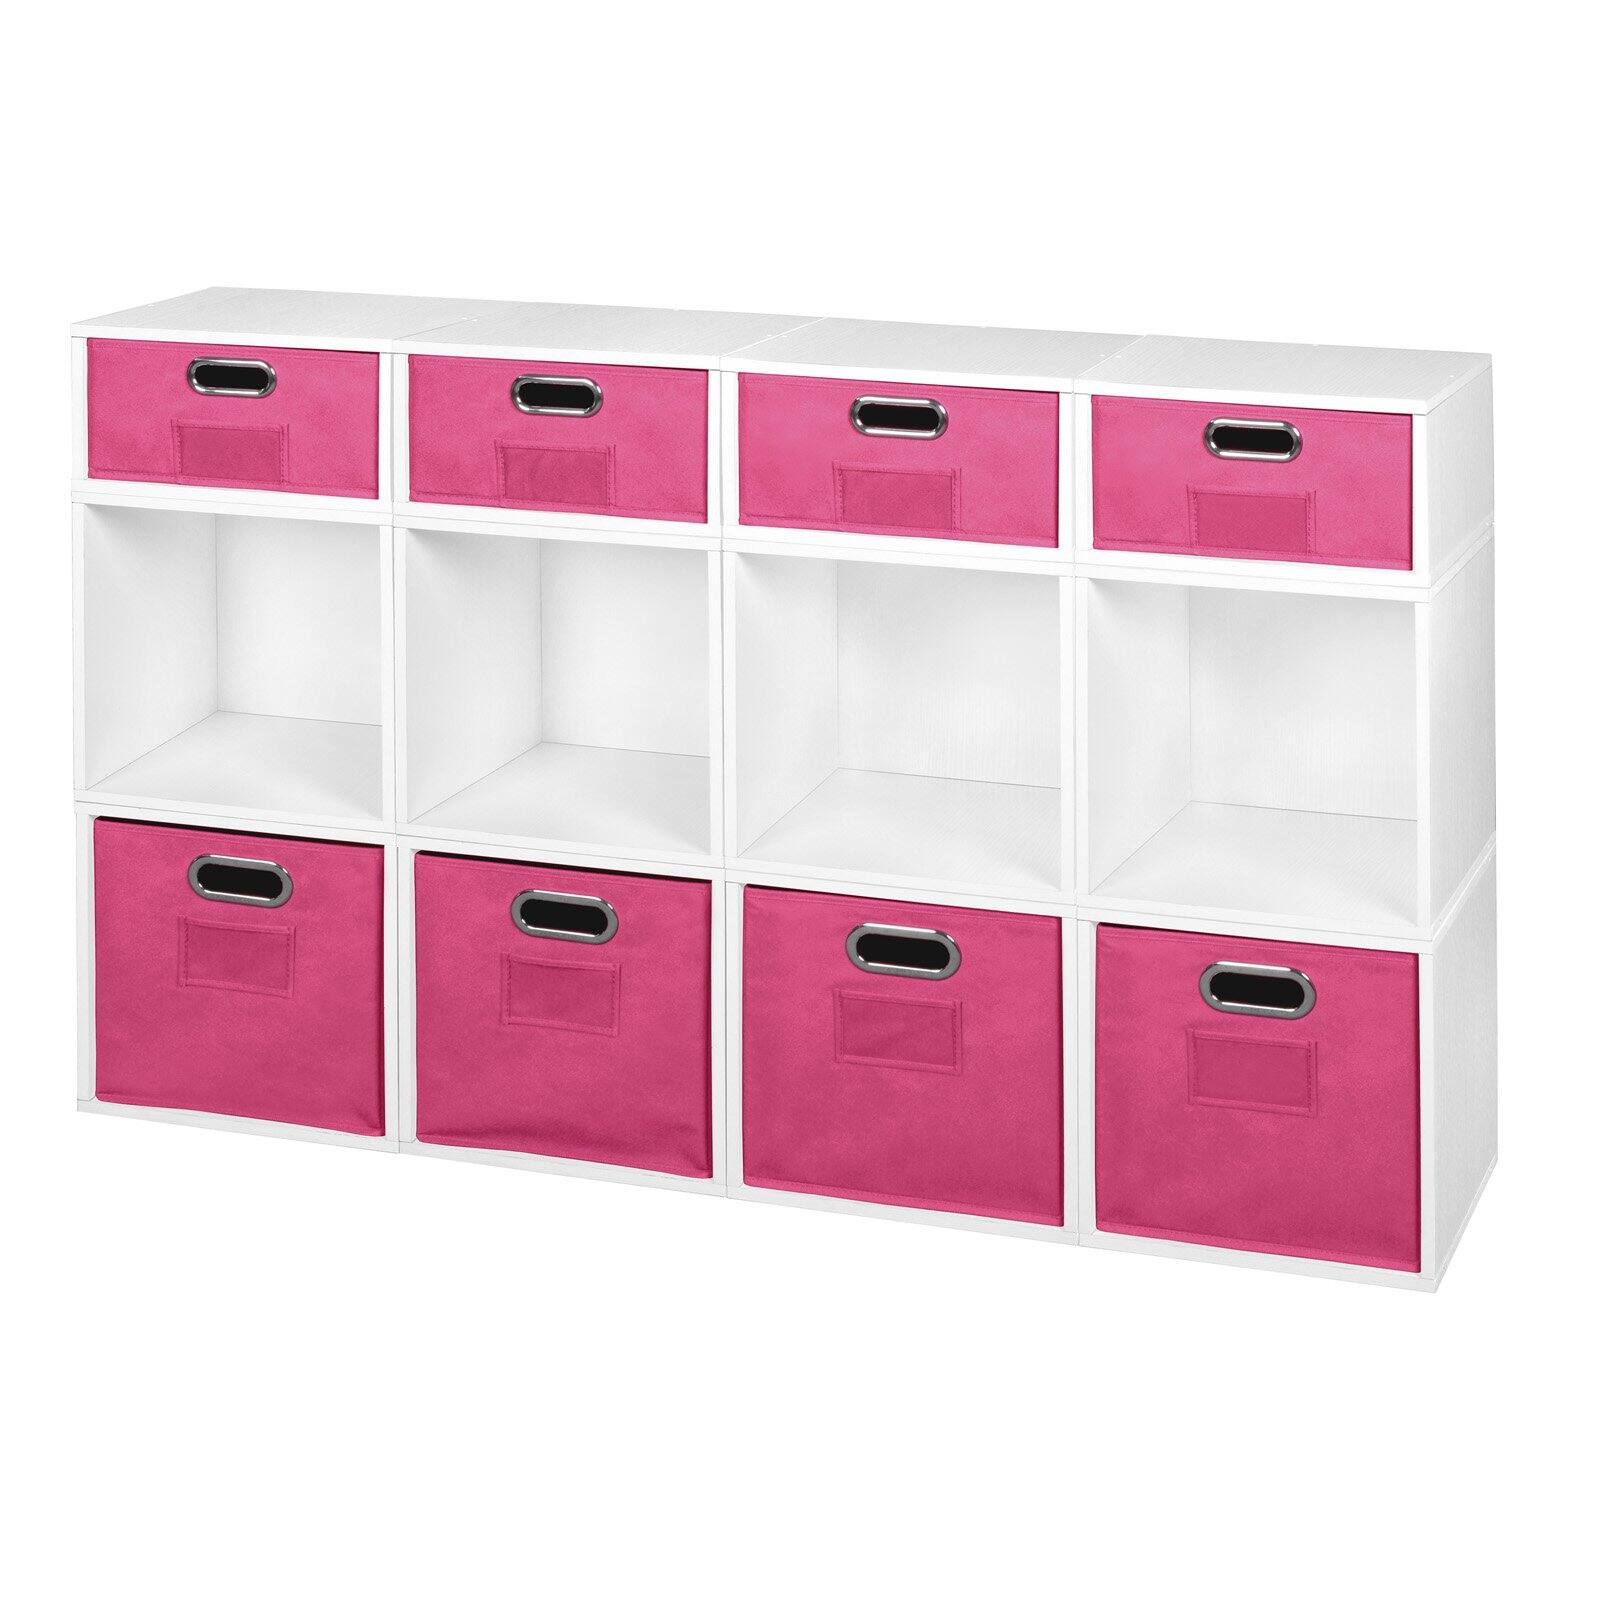 Niche Cubo Storage Set- 8 Full Cubes/4 Half Cubes with Foldable Storage Bins- Truffle/Pink - image 2 of 8